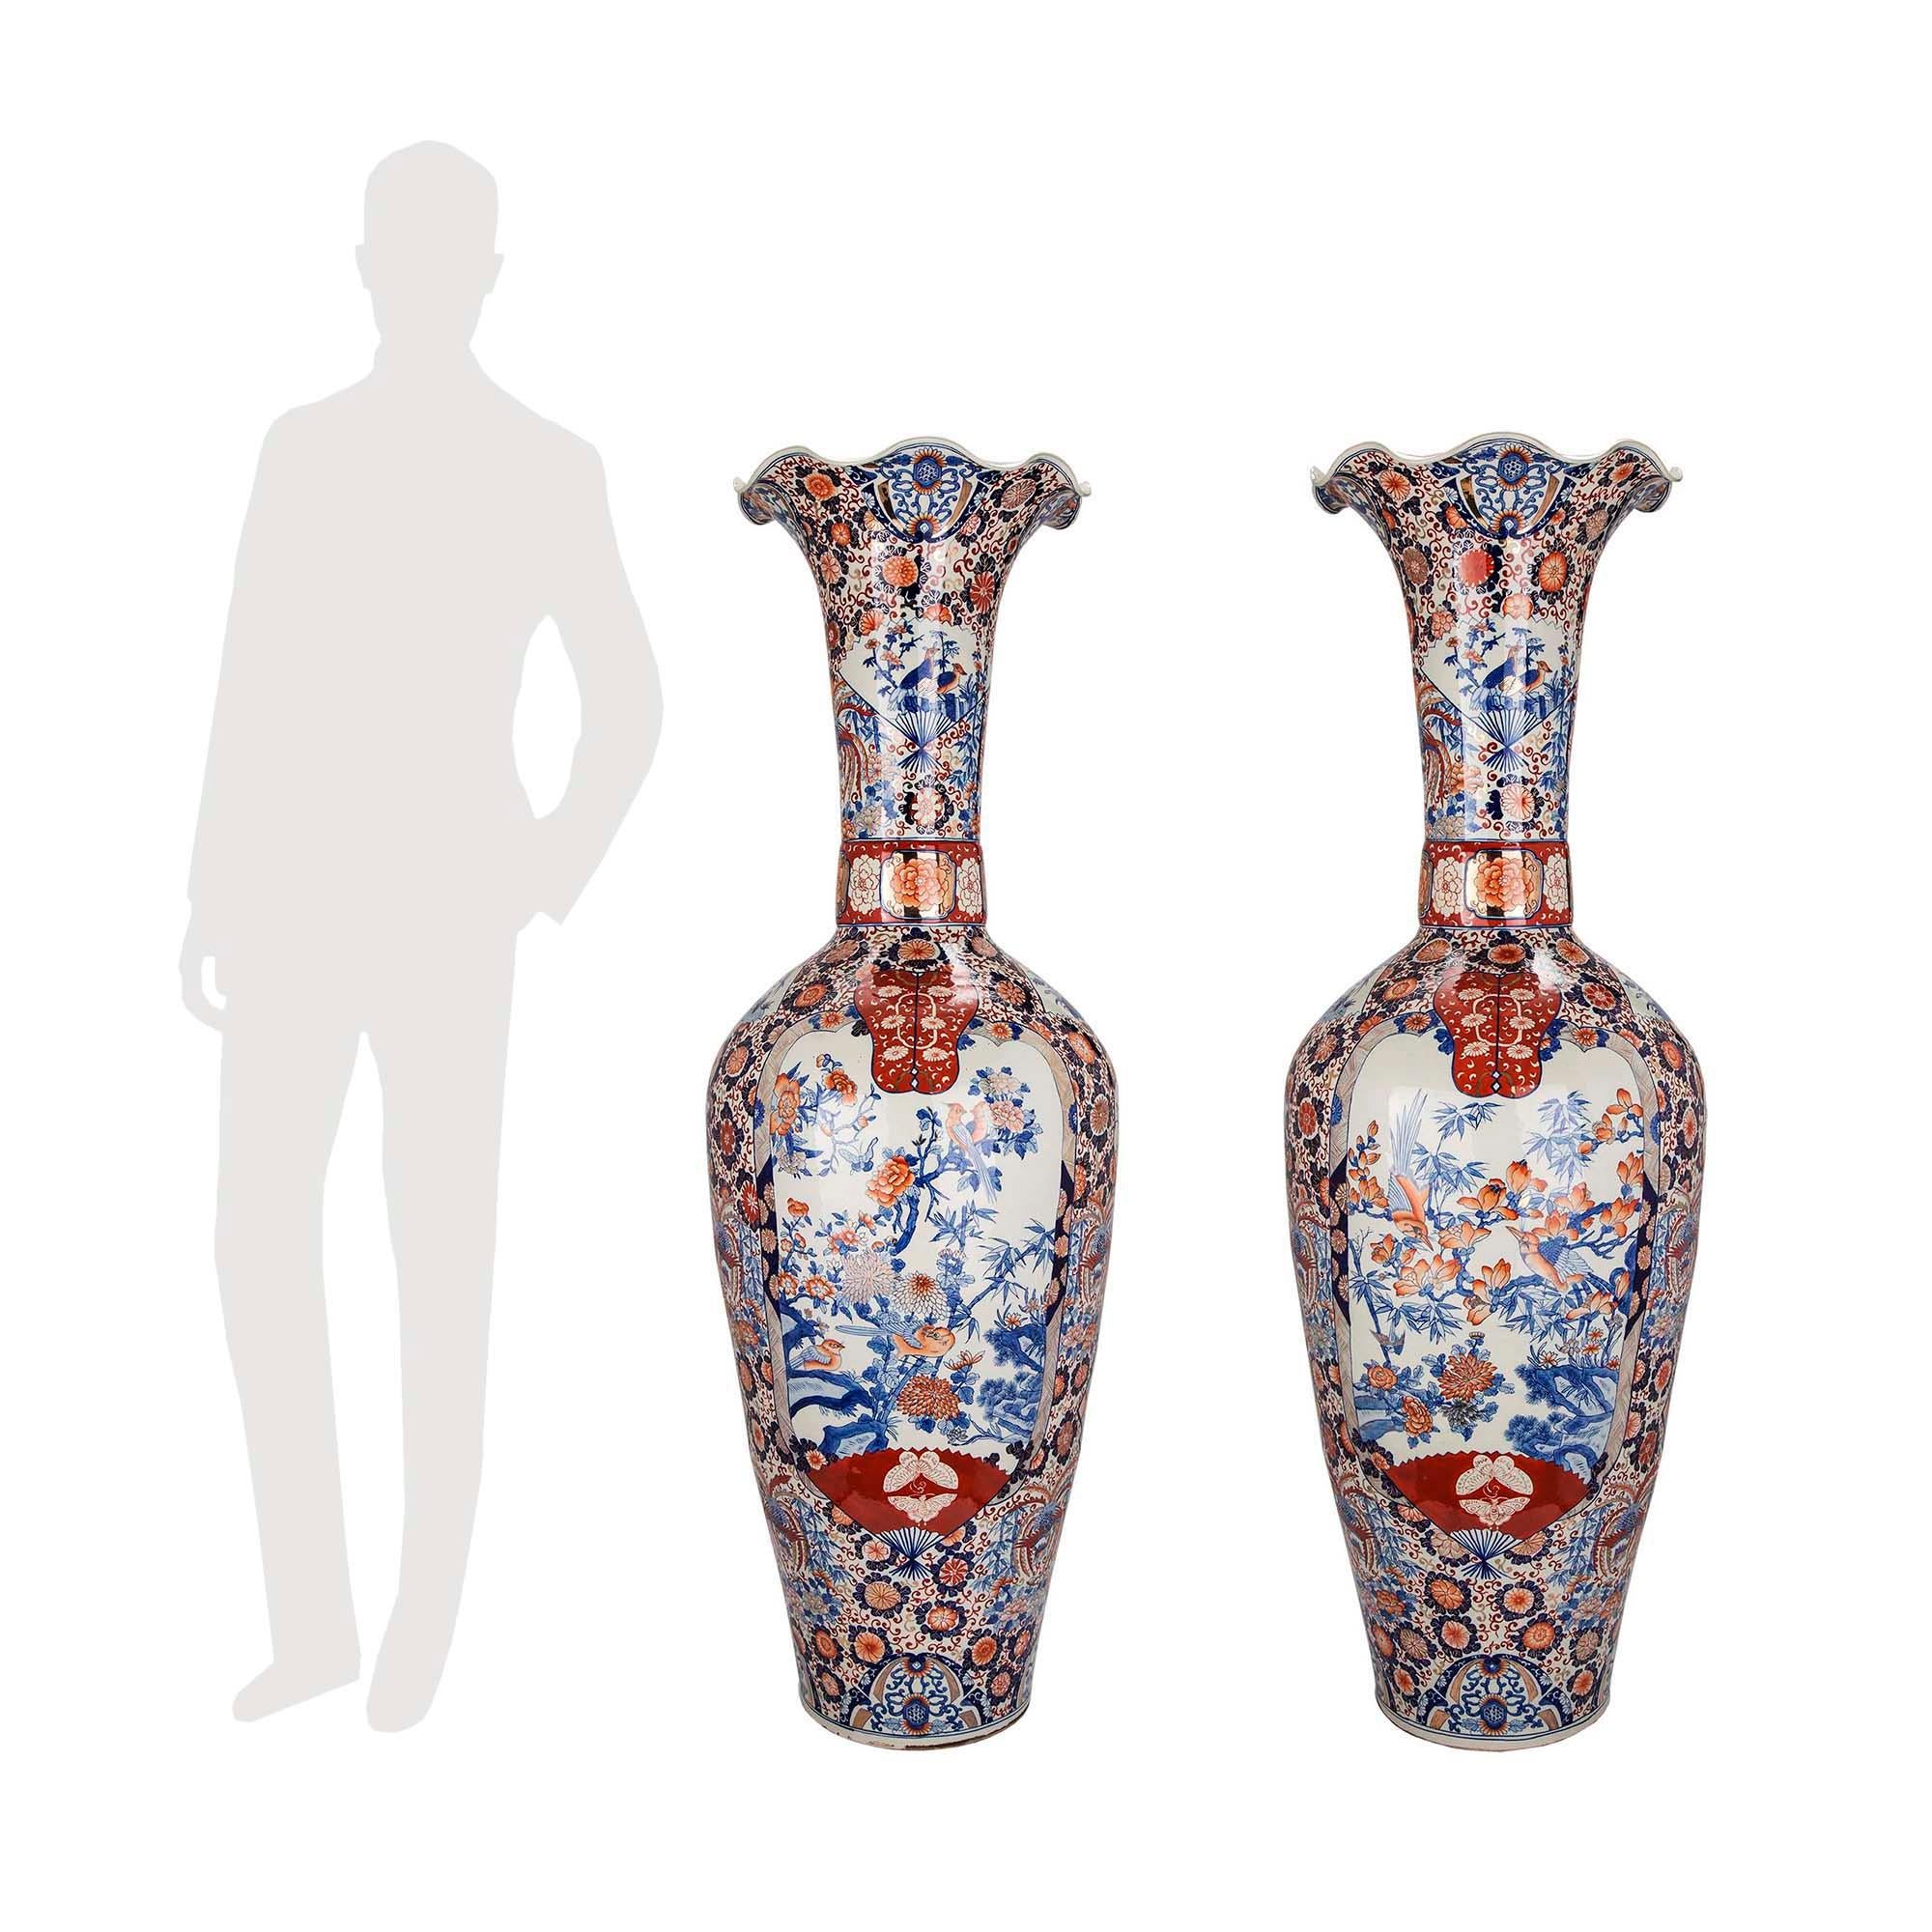 A sensational and very large scale pair of 19th century Imari vases. Each striking vase stands at over 5 feet tall and displays wonderful vivid floral patterns centering charming and detailed floral and foliate scenery. The long impressive necks